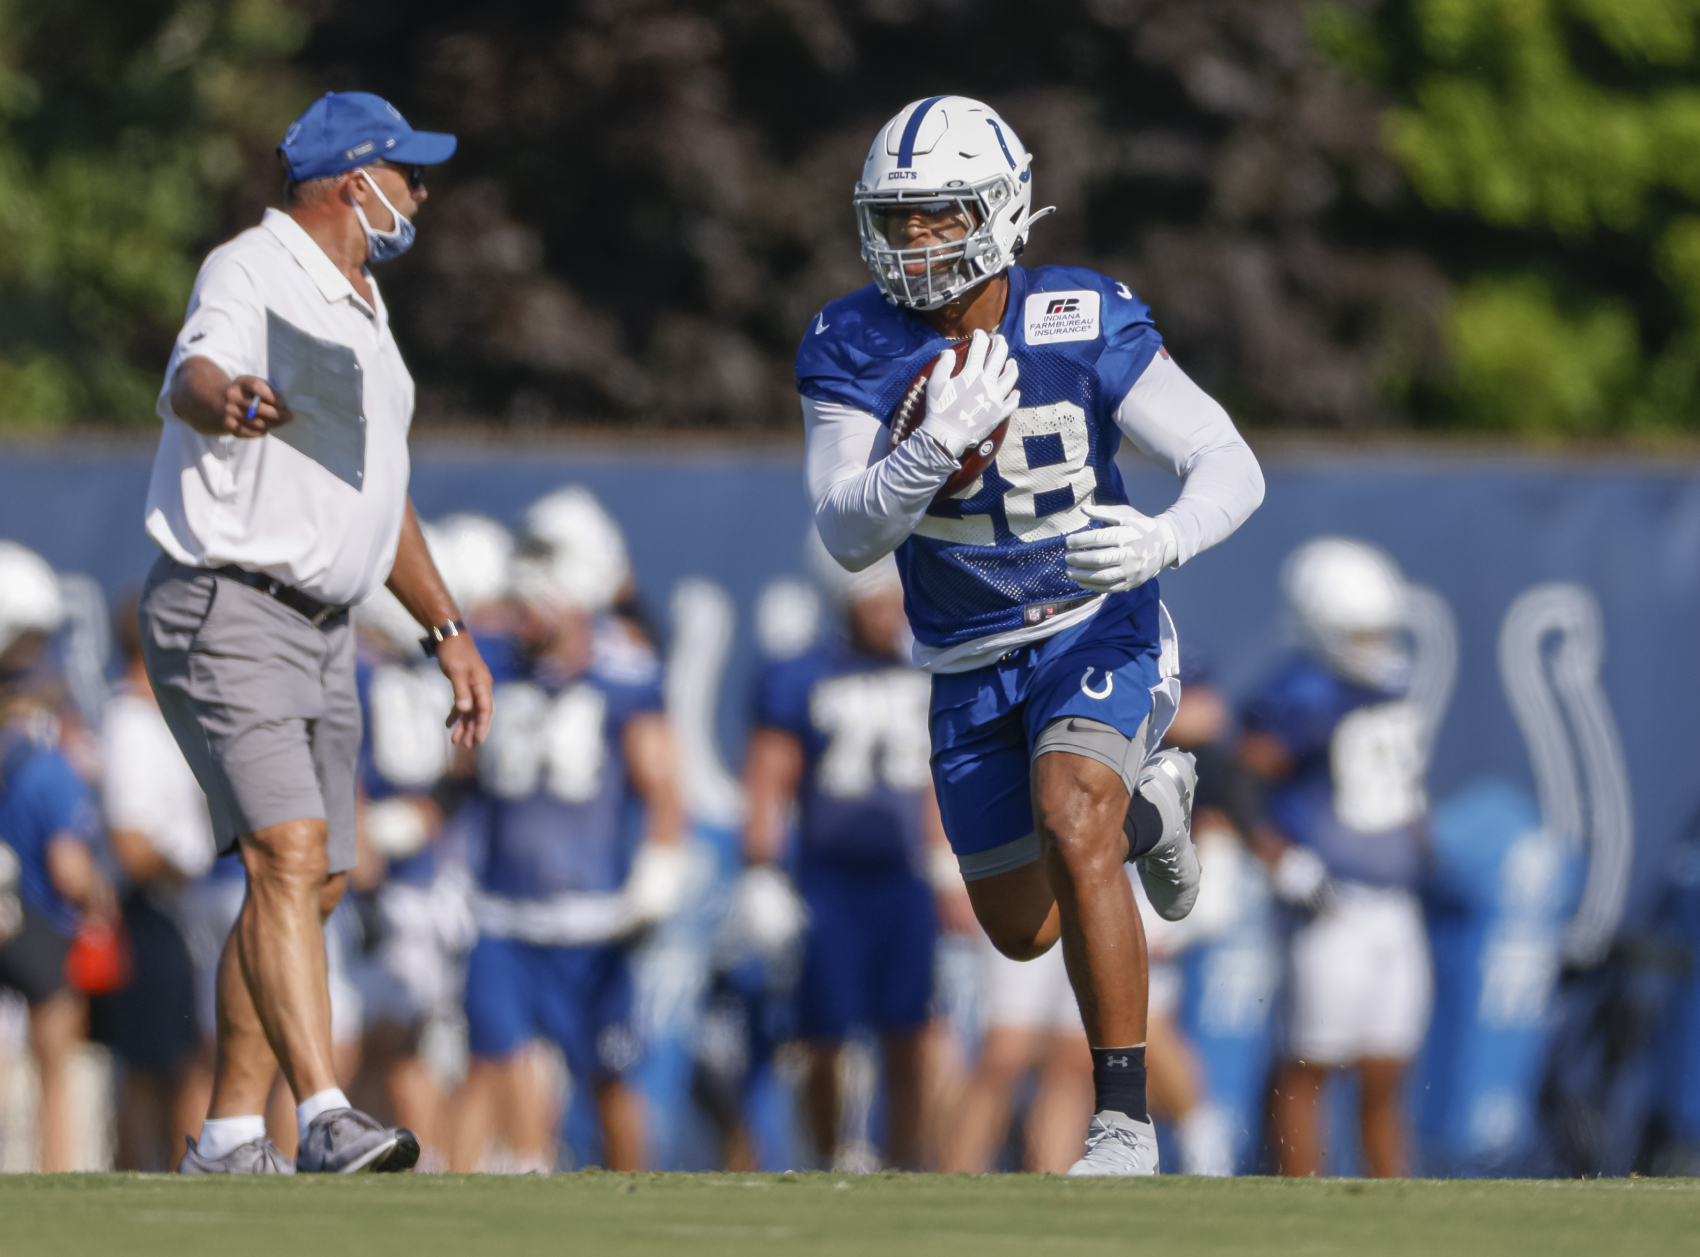 Jonathan Taylor has a chance to be one of the top rookies in the NFL. Now, the Indianapolis Colts are giving him a chance to become a top RB.